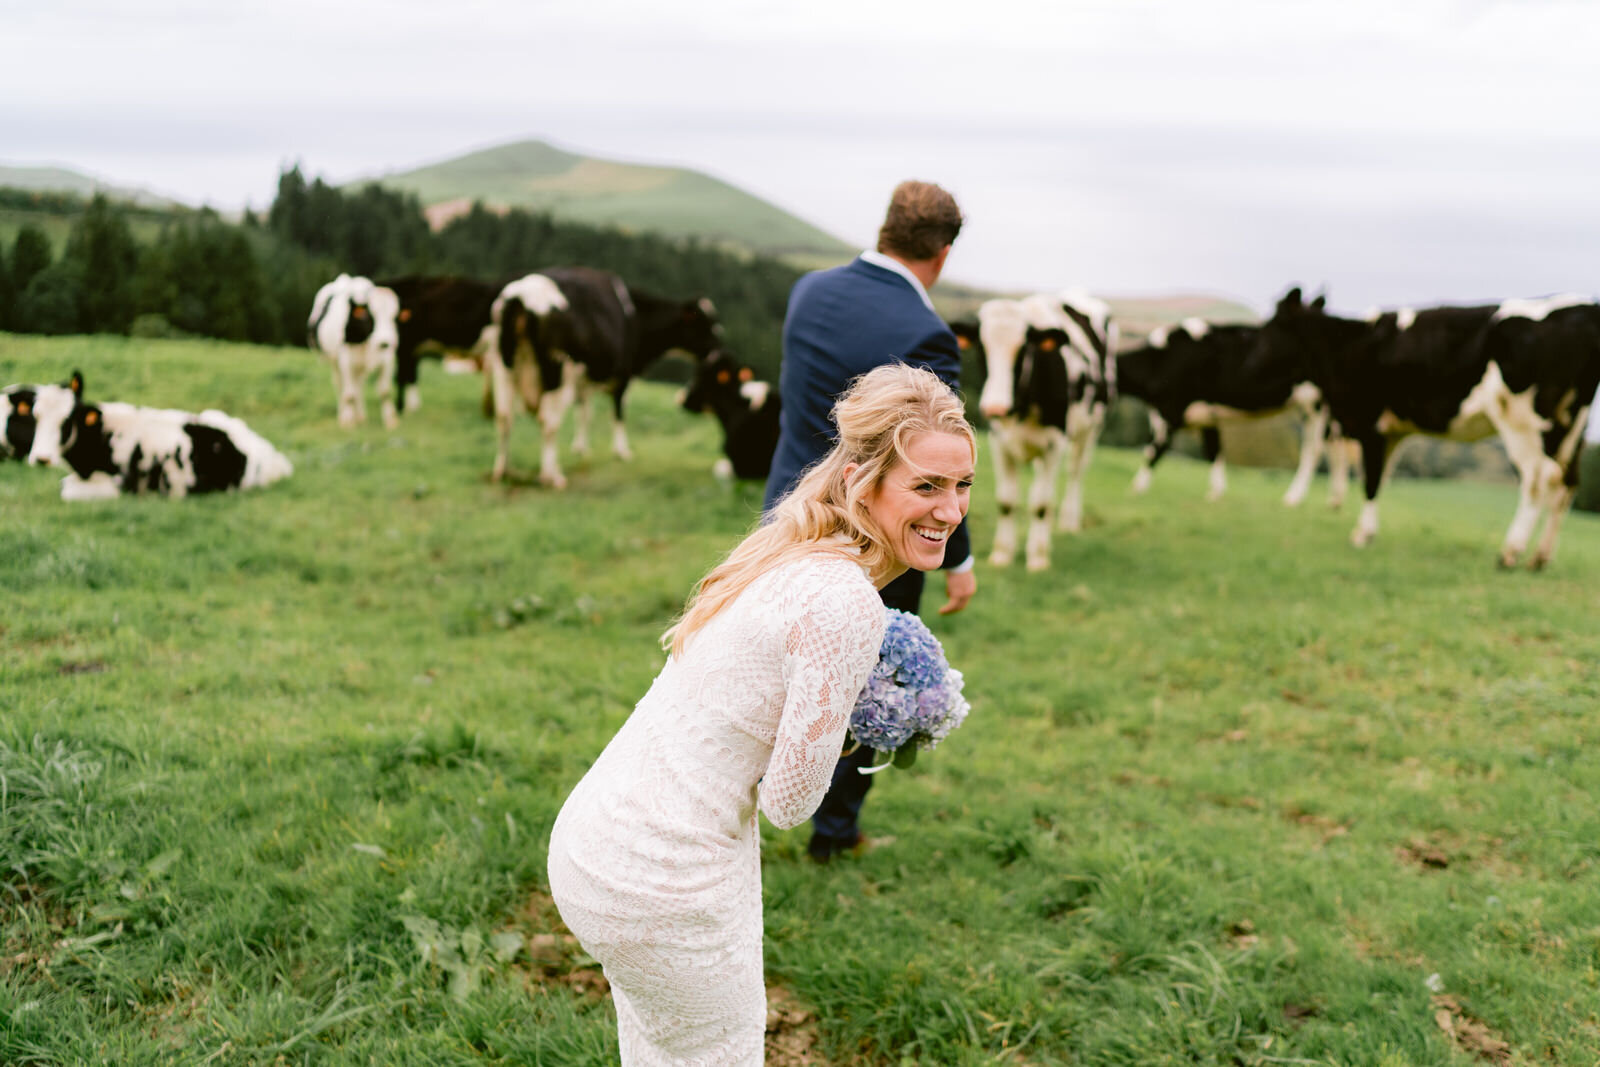 Elopement in the Azores. Cpuple getting married in Portugal. Elopement photography in Europe. Epic locations to elope in the world. Sao Miquel island Azores wedding (54).jpg